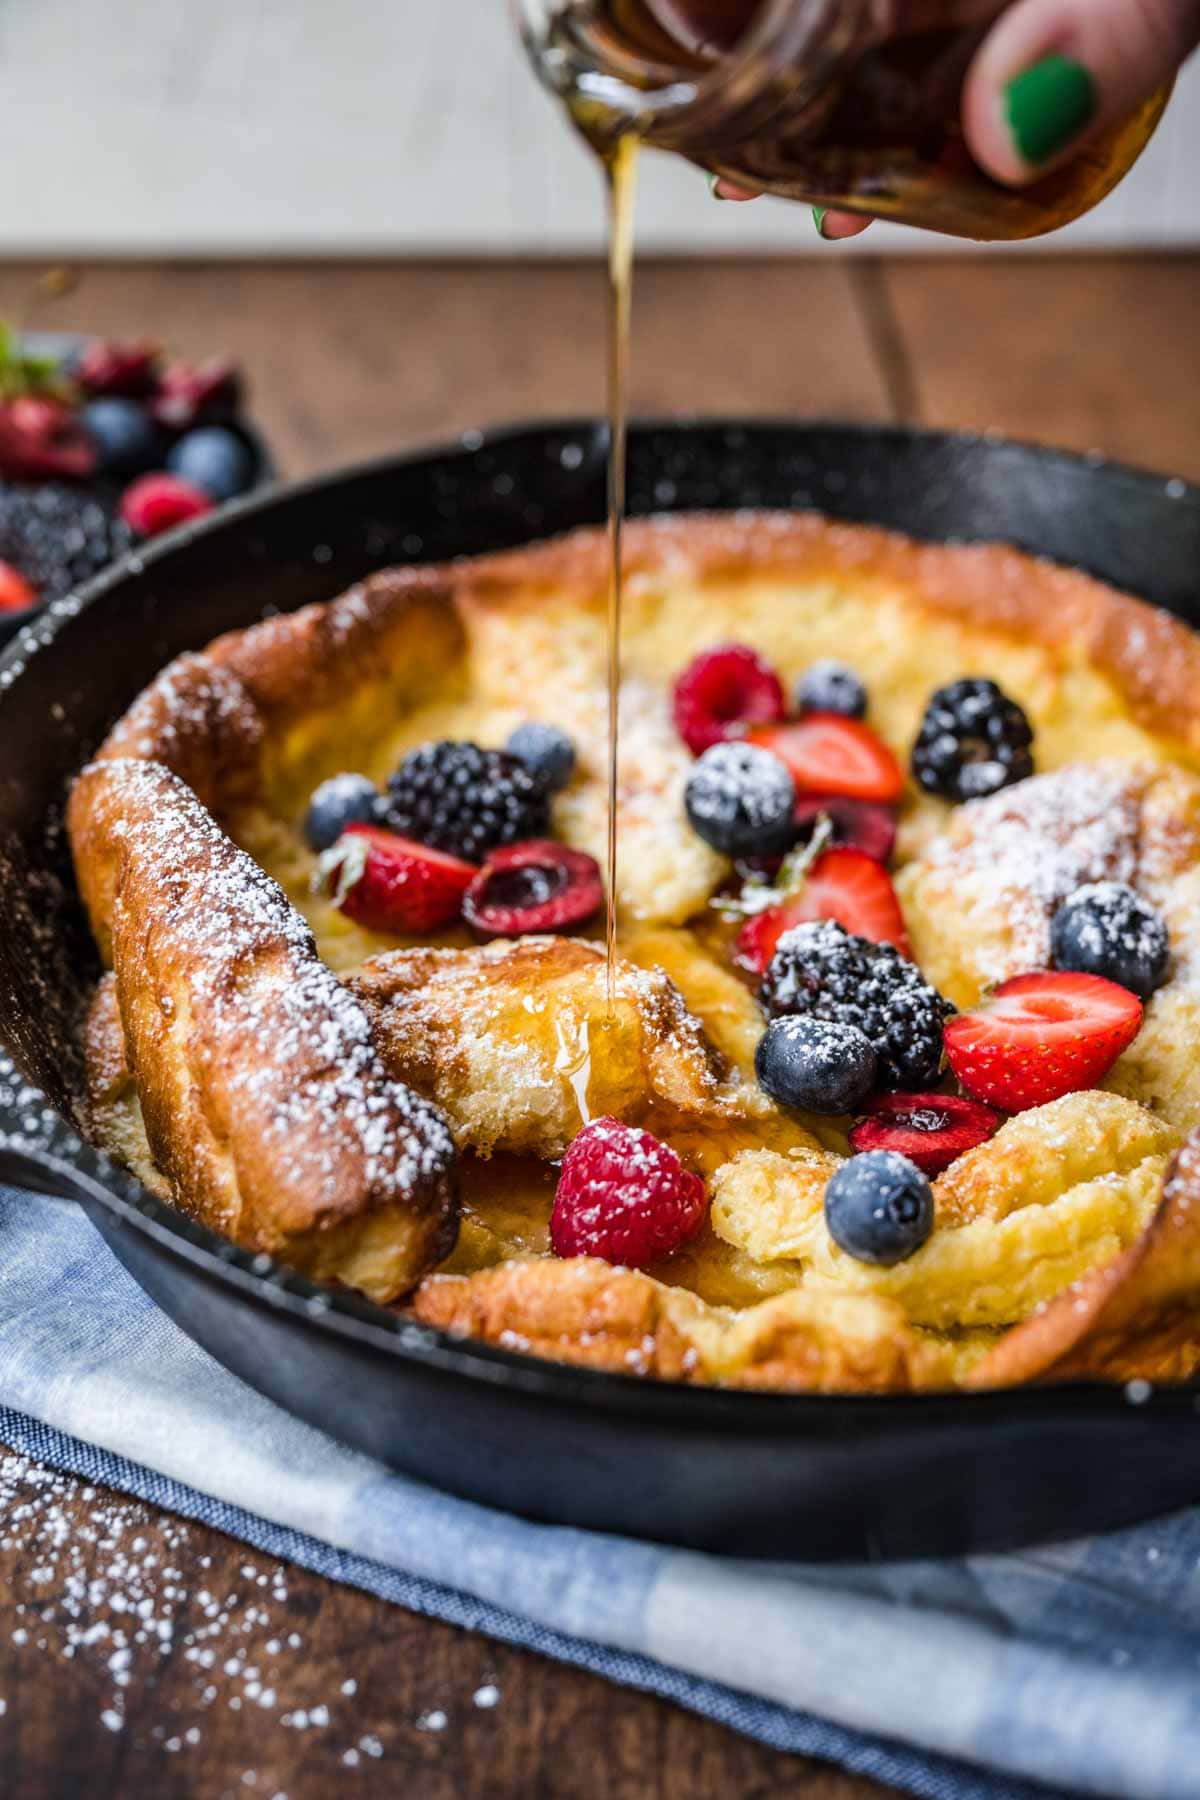 Skillet Baked Pancake in cast iron skillet with fresh berries and maple syrup